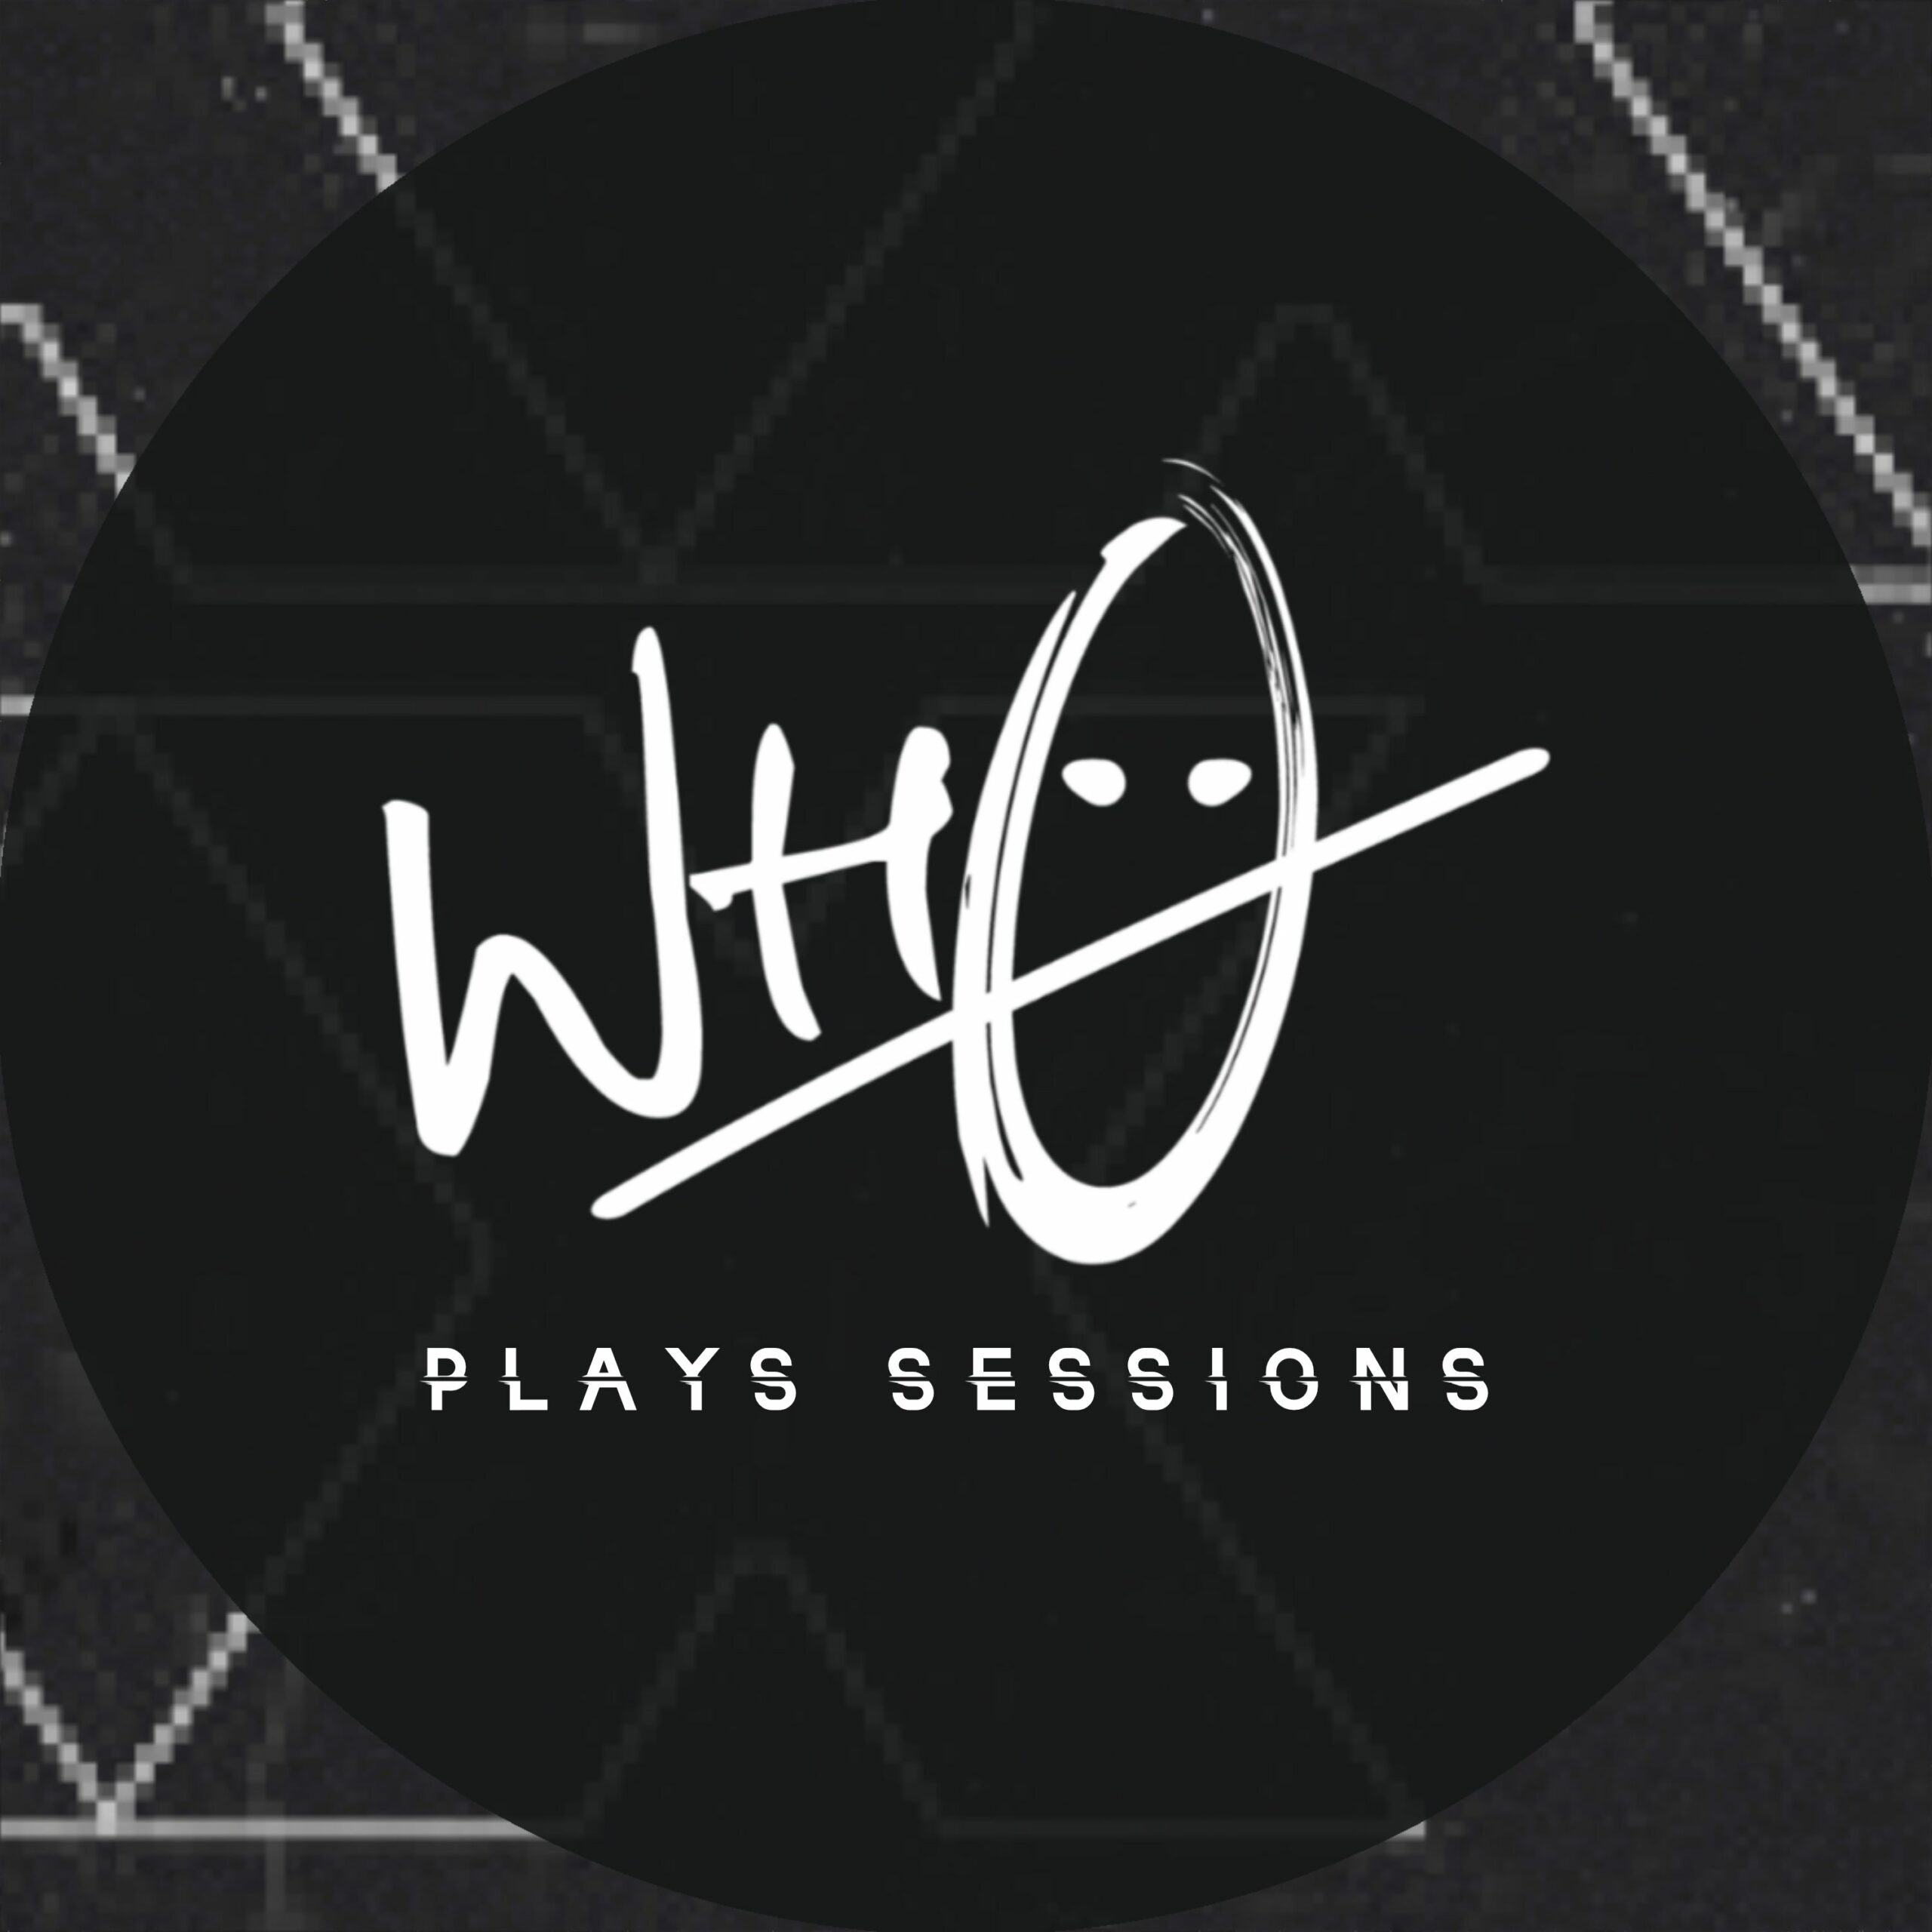 Wh0 Plays Sessions